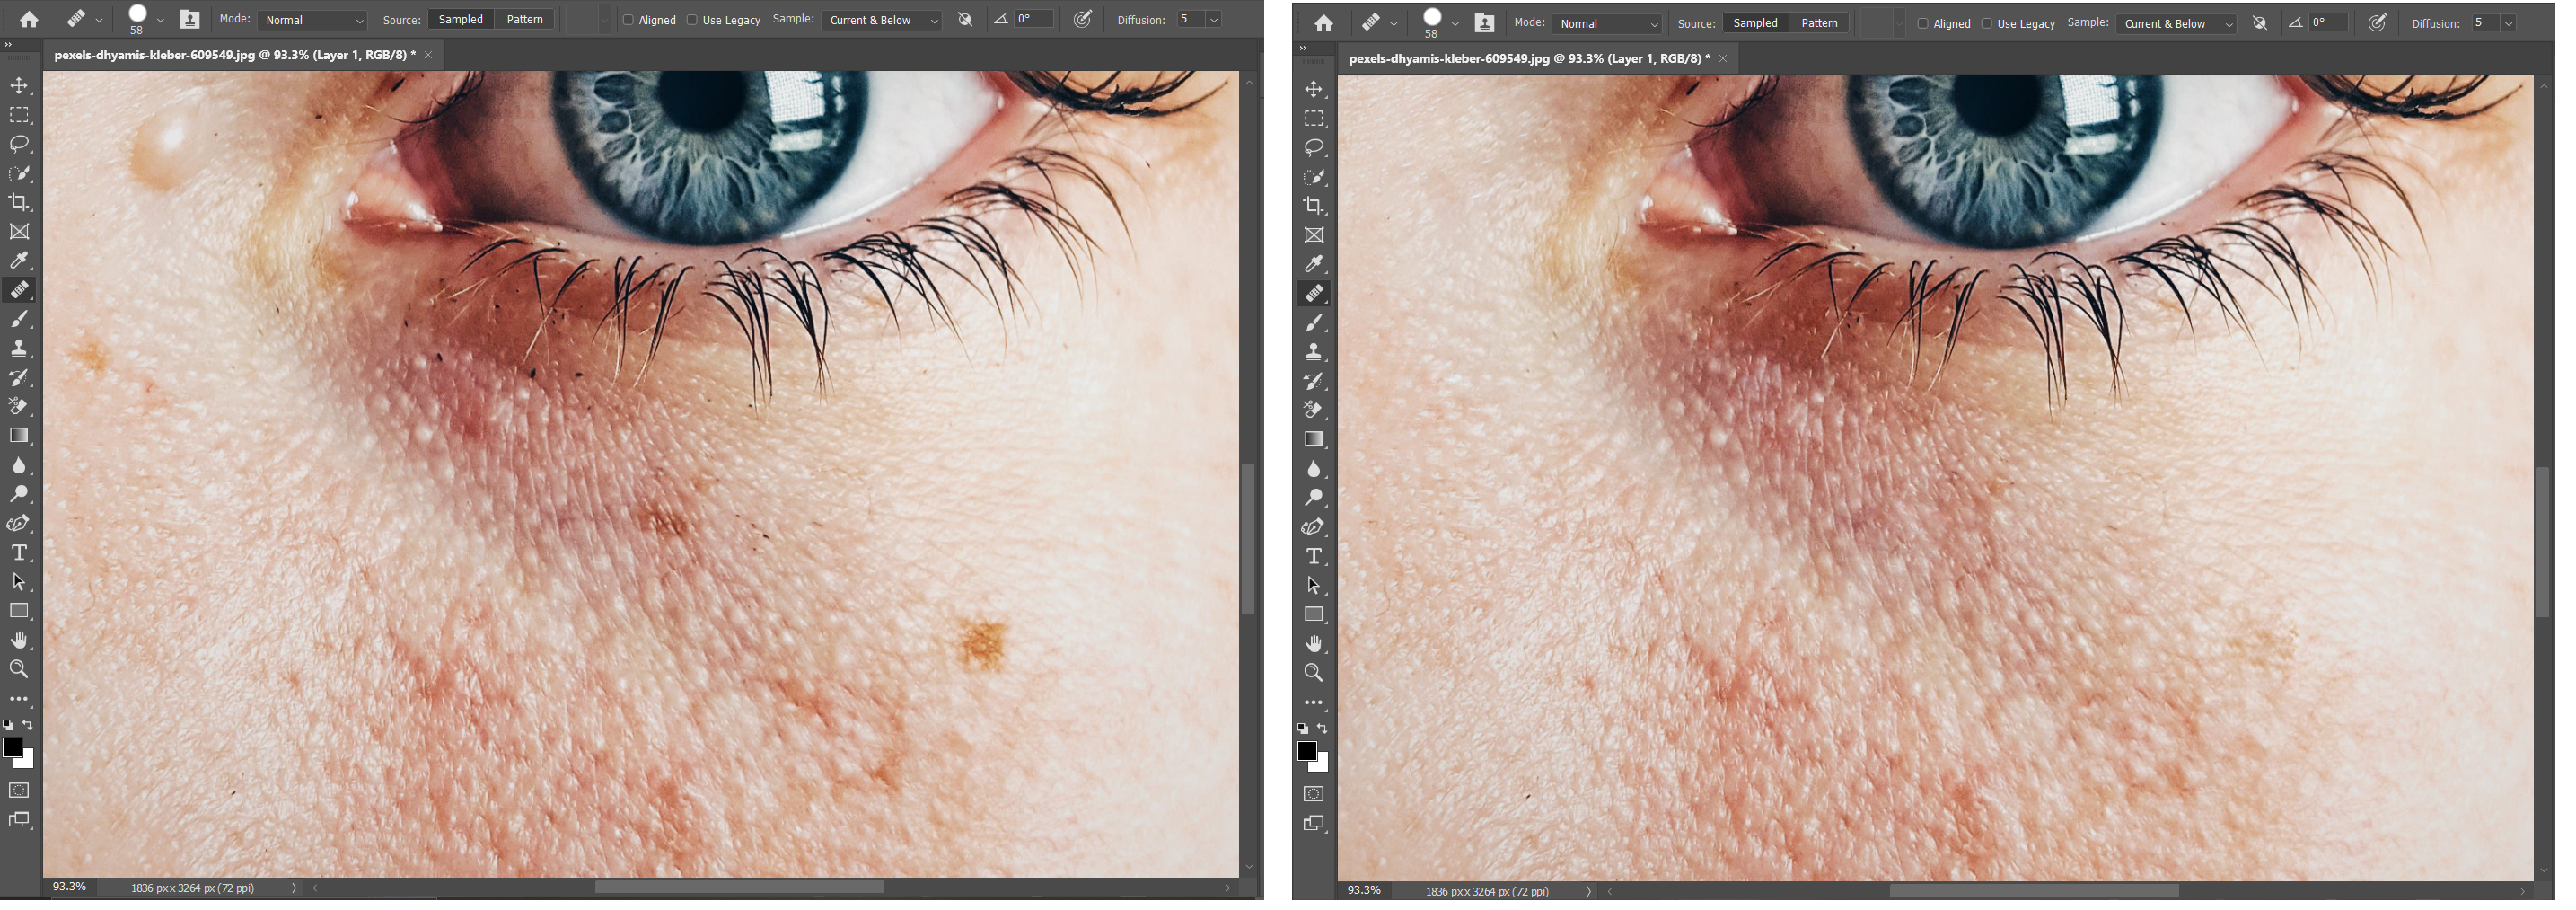 02 Healing Brush Tool Before And After - 4 macchie che puoi rimuovere facilmente usando Photoshop